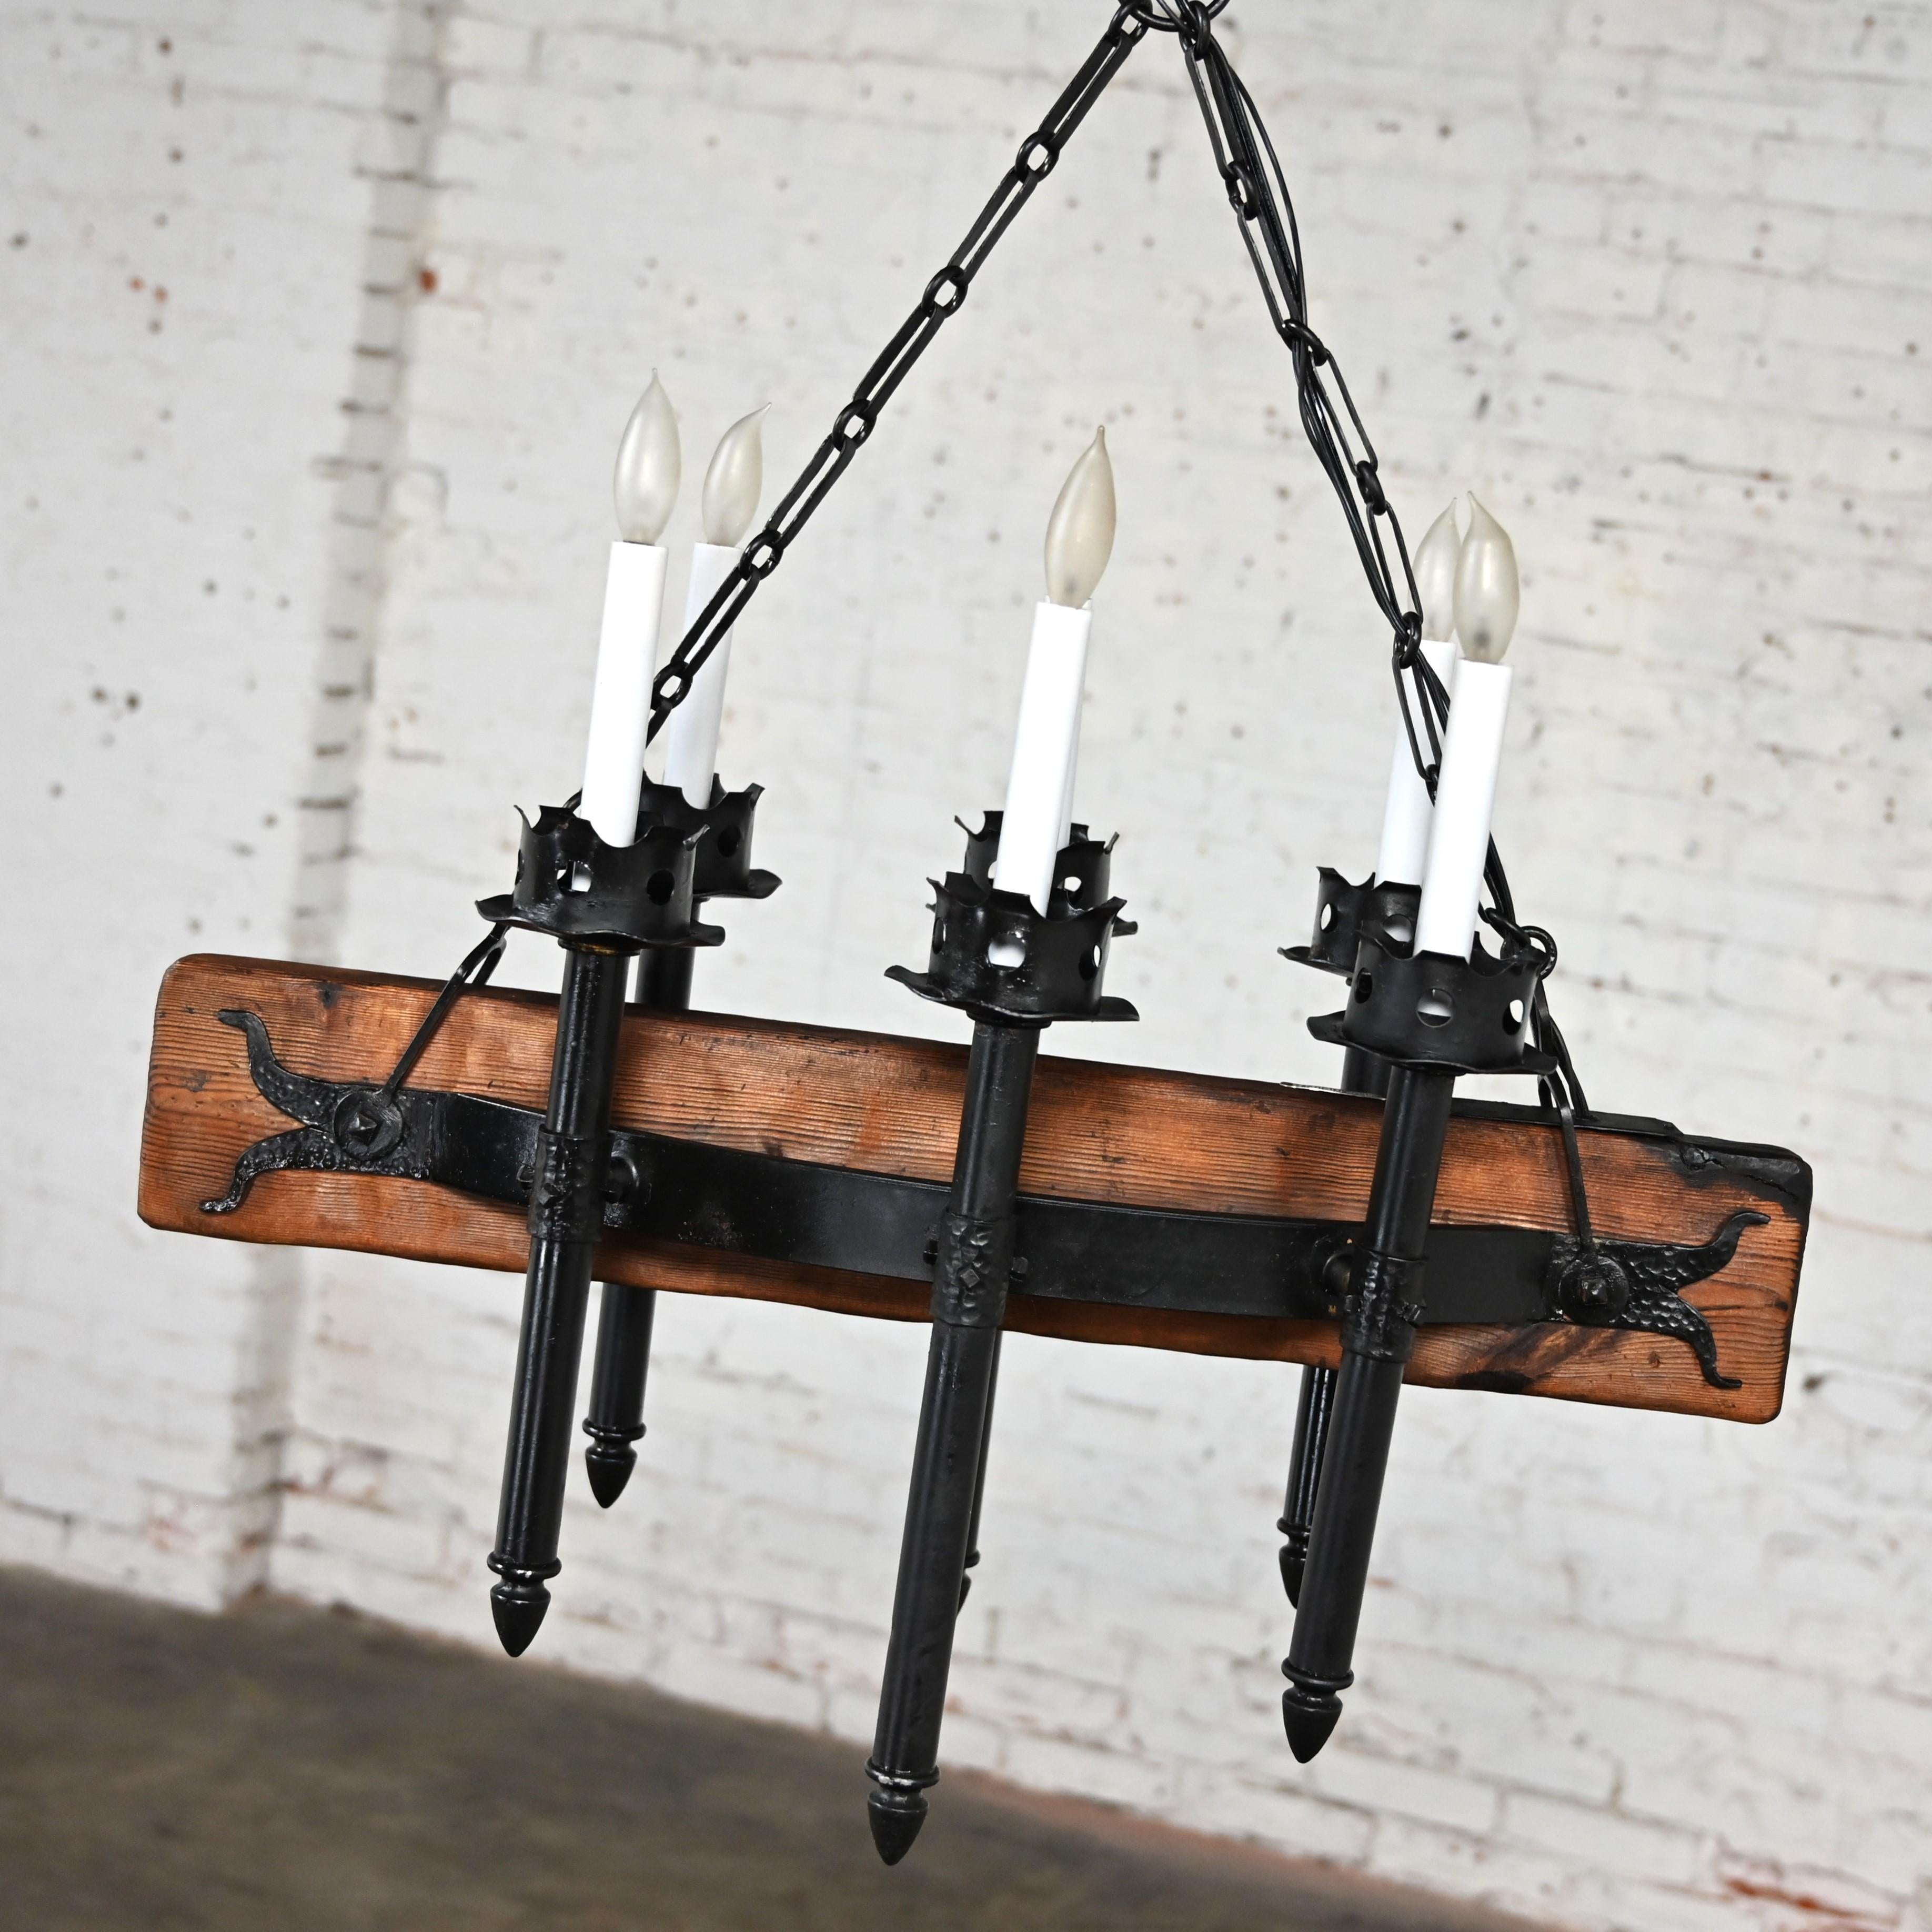 Medieval Gothic Spanish Revival Iron & Wood Beam Hanging Light Fixture Mexico In Good Condition For Sale In Topeka, KS